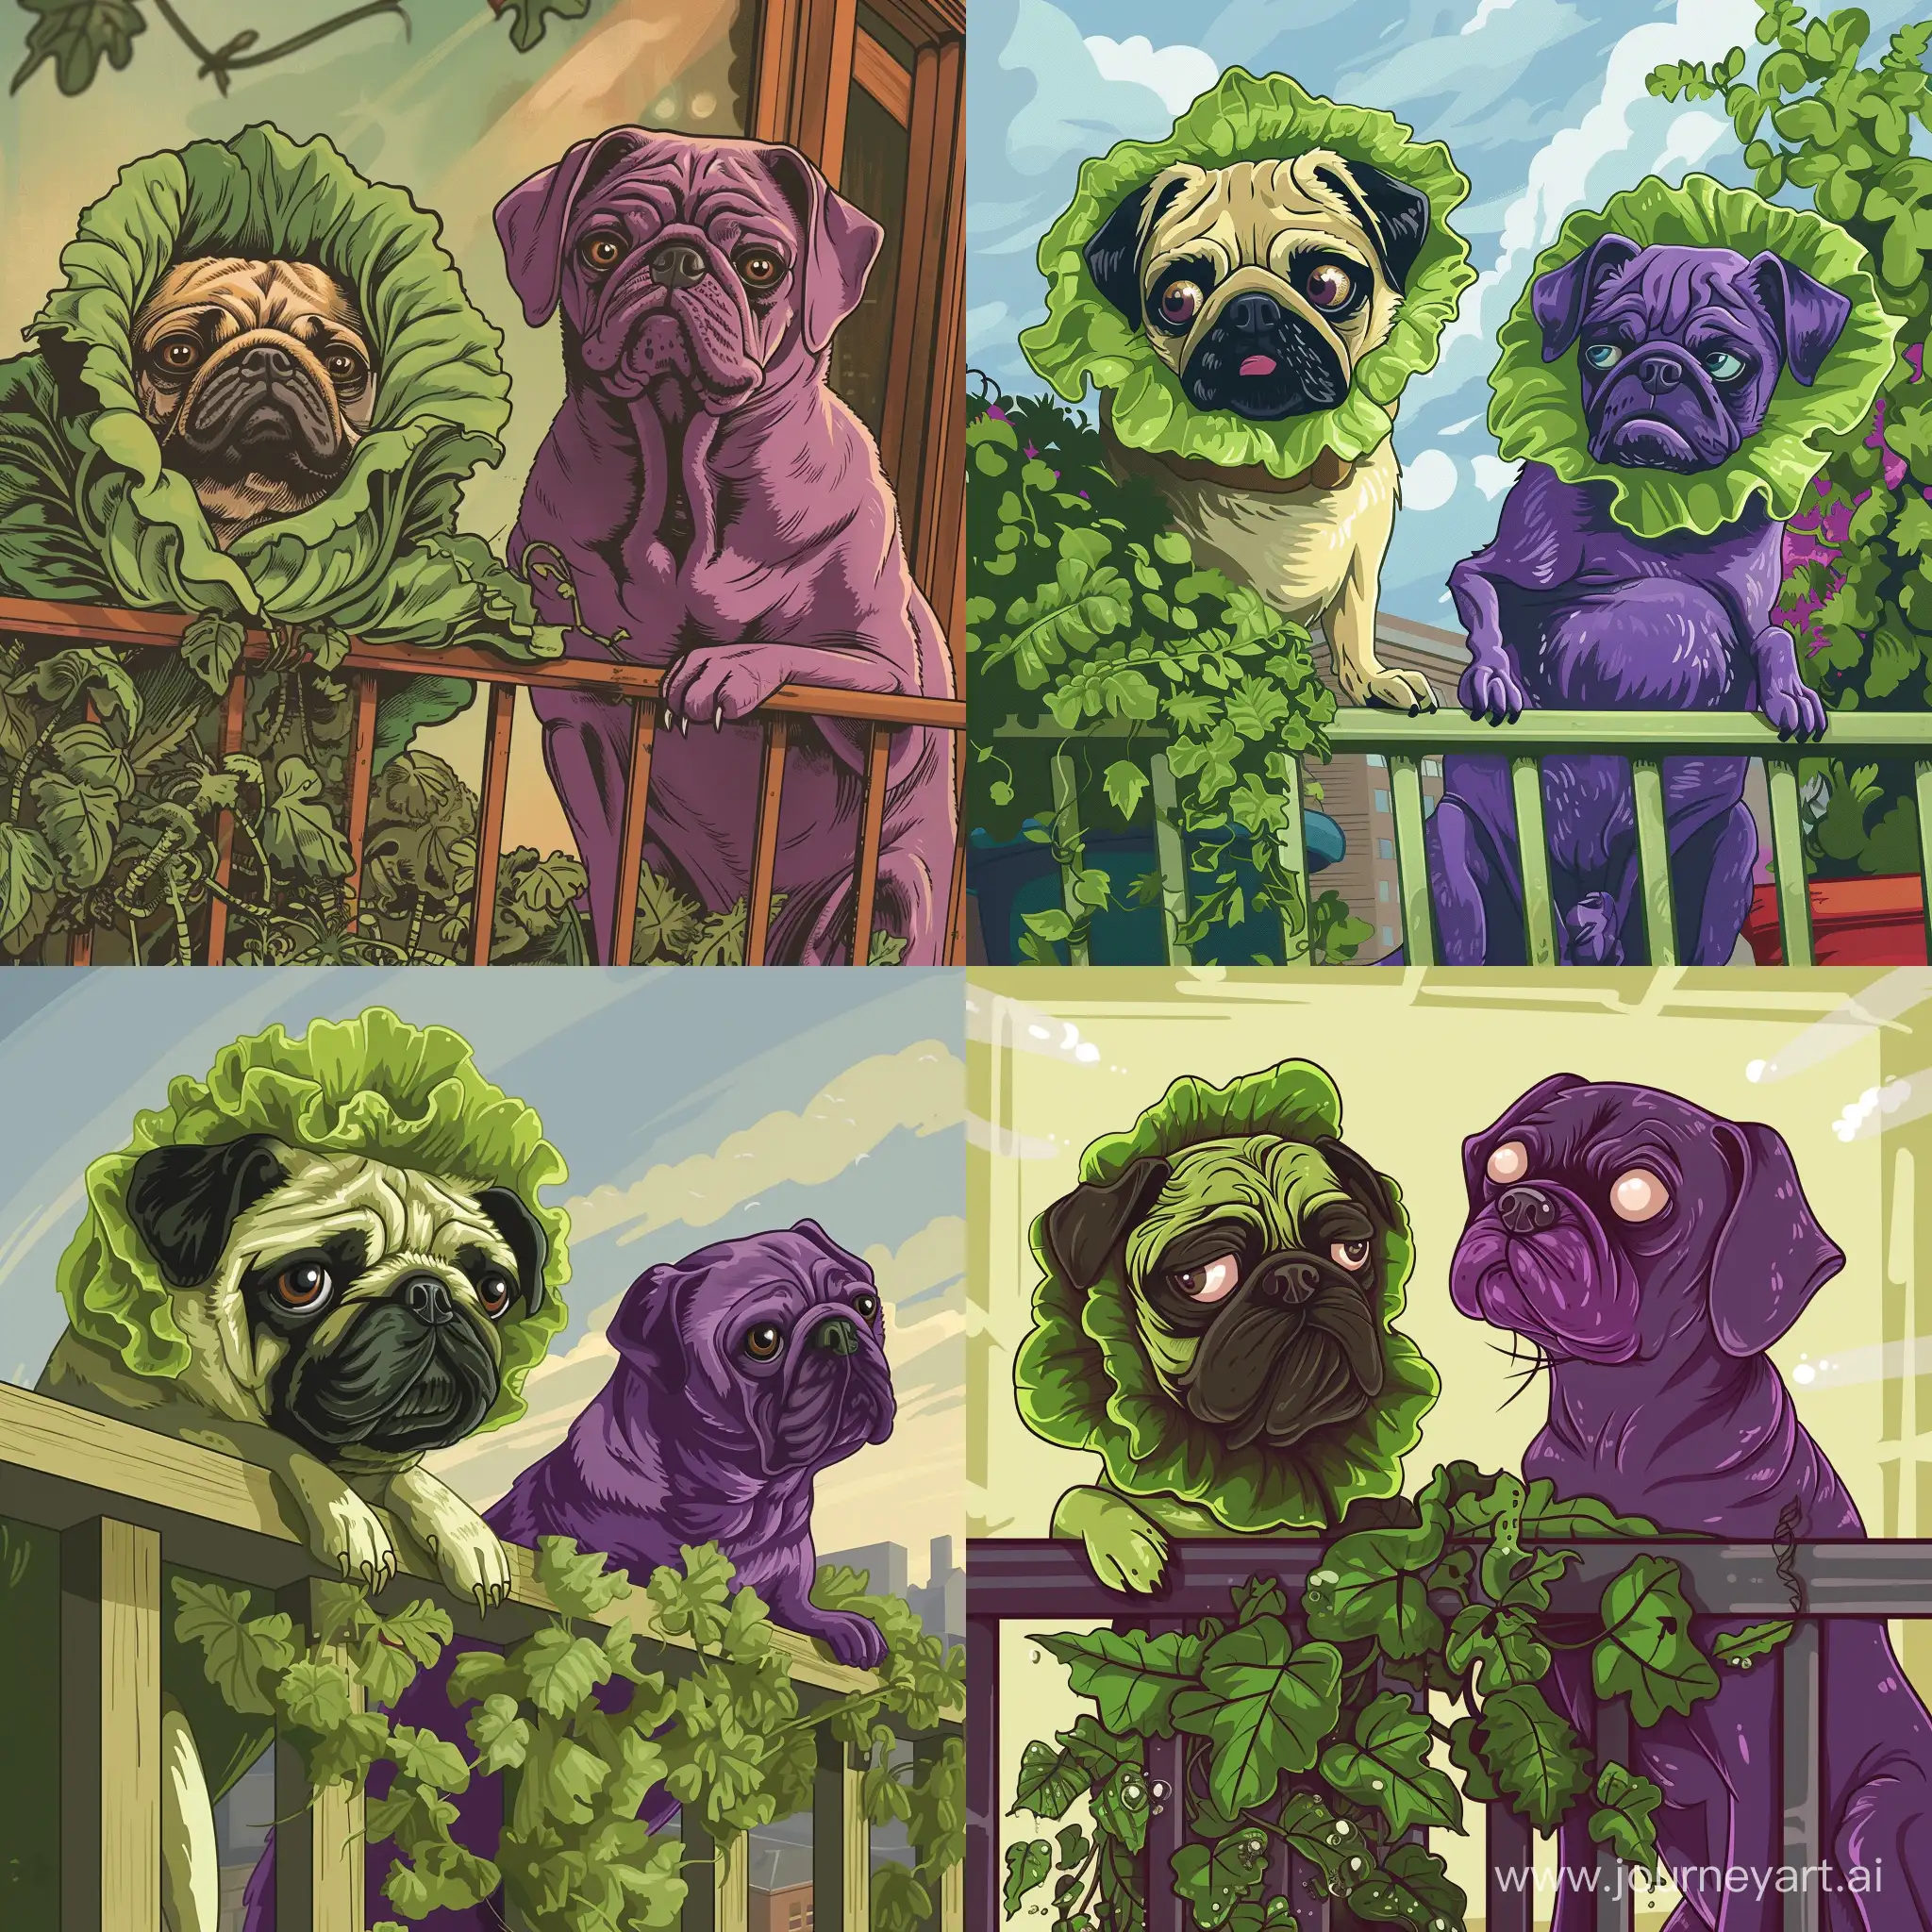 Whimsical-Illustration-of-a-Grumpy-Lettuce-Pug-Dog-and-Purple-Greyhound-on-a-Balcony-Surrounded-by-Plants